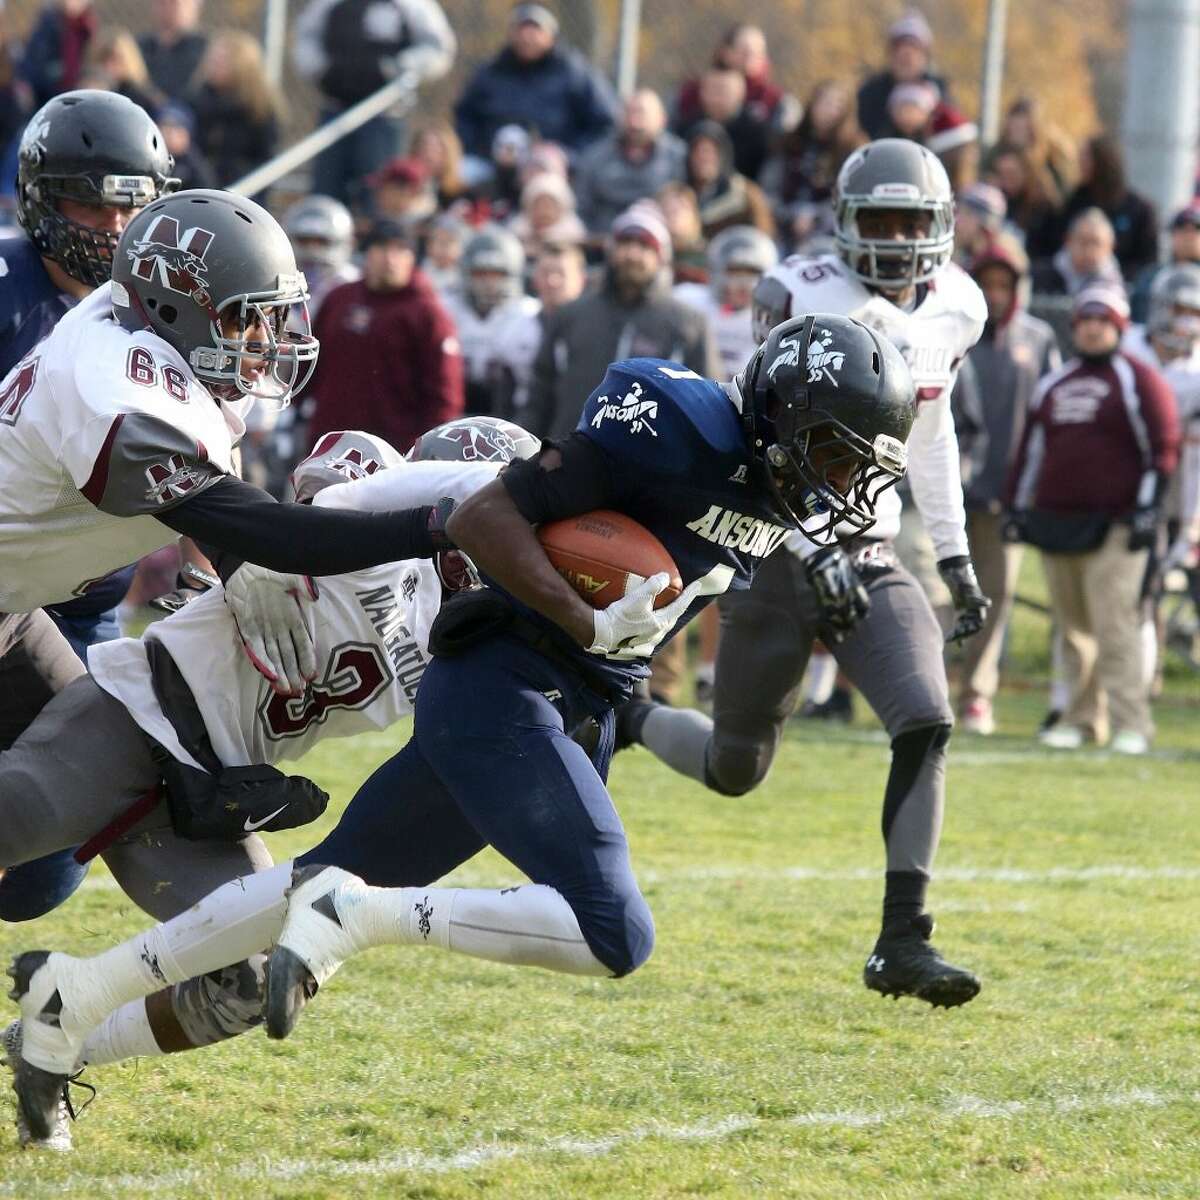 Ansonia junior Markell Dobbs rushed for 160 yards and two touchdowns in a 44-0 win over Naugatuck.